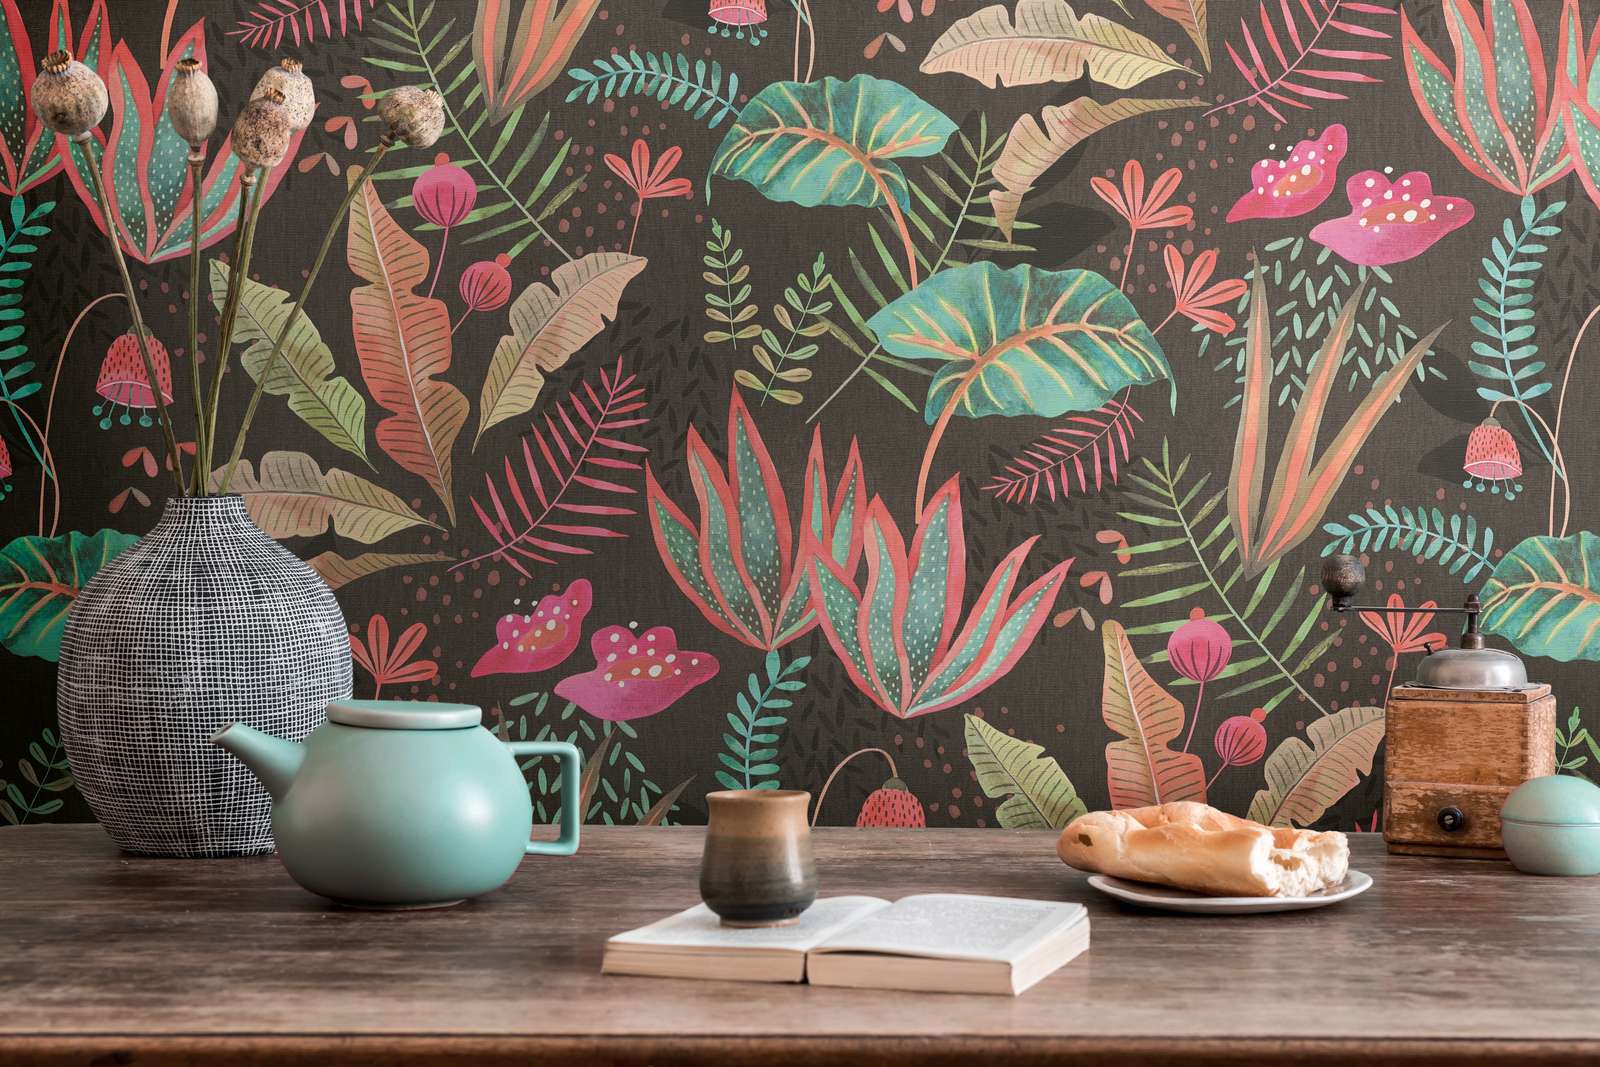             Floral non-woven wallpaper with mixed leaves lightly textured, matt - black, multicoloured, green
        